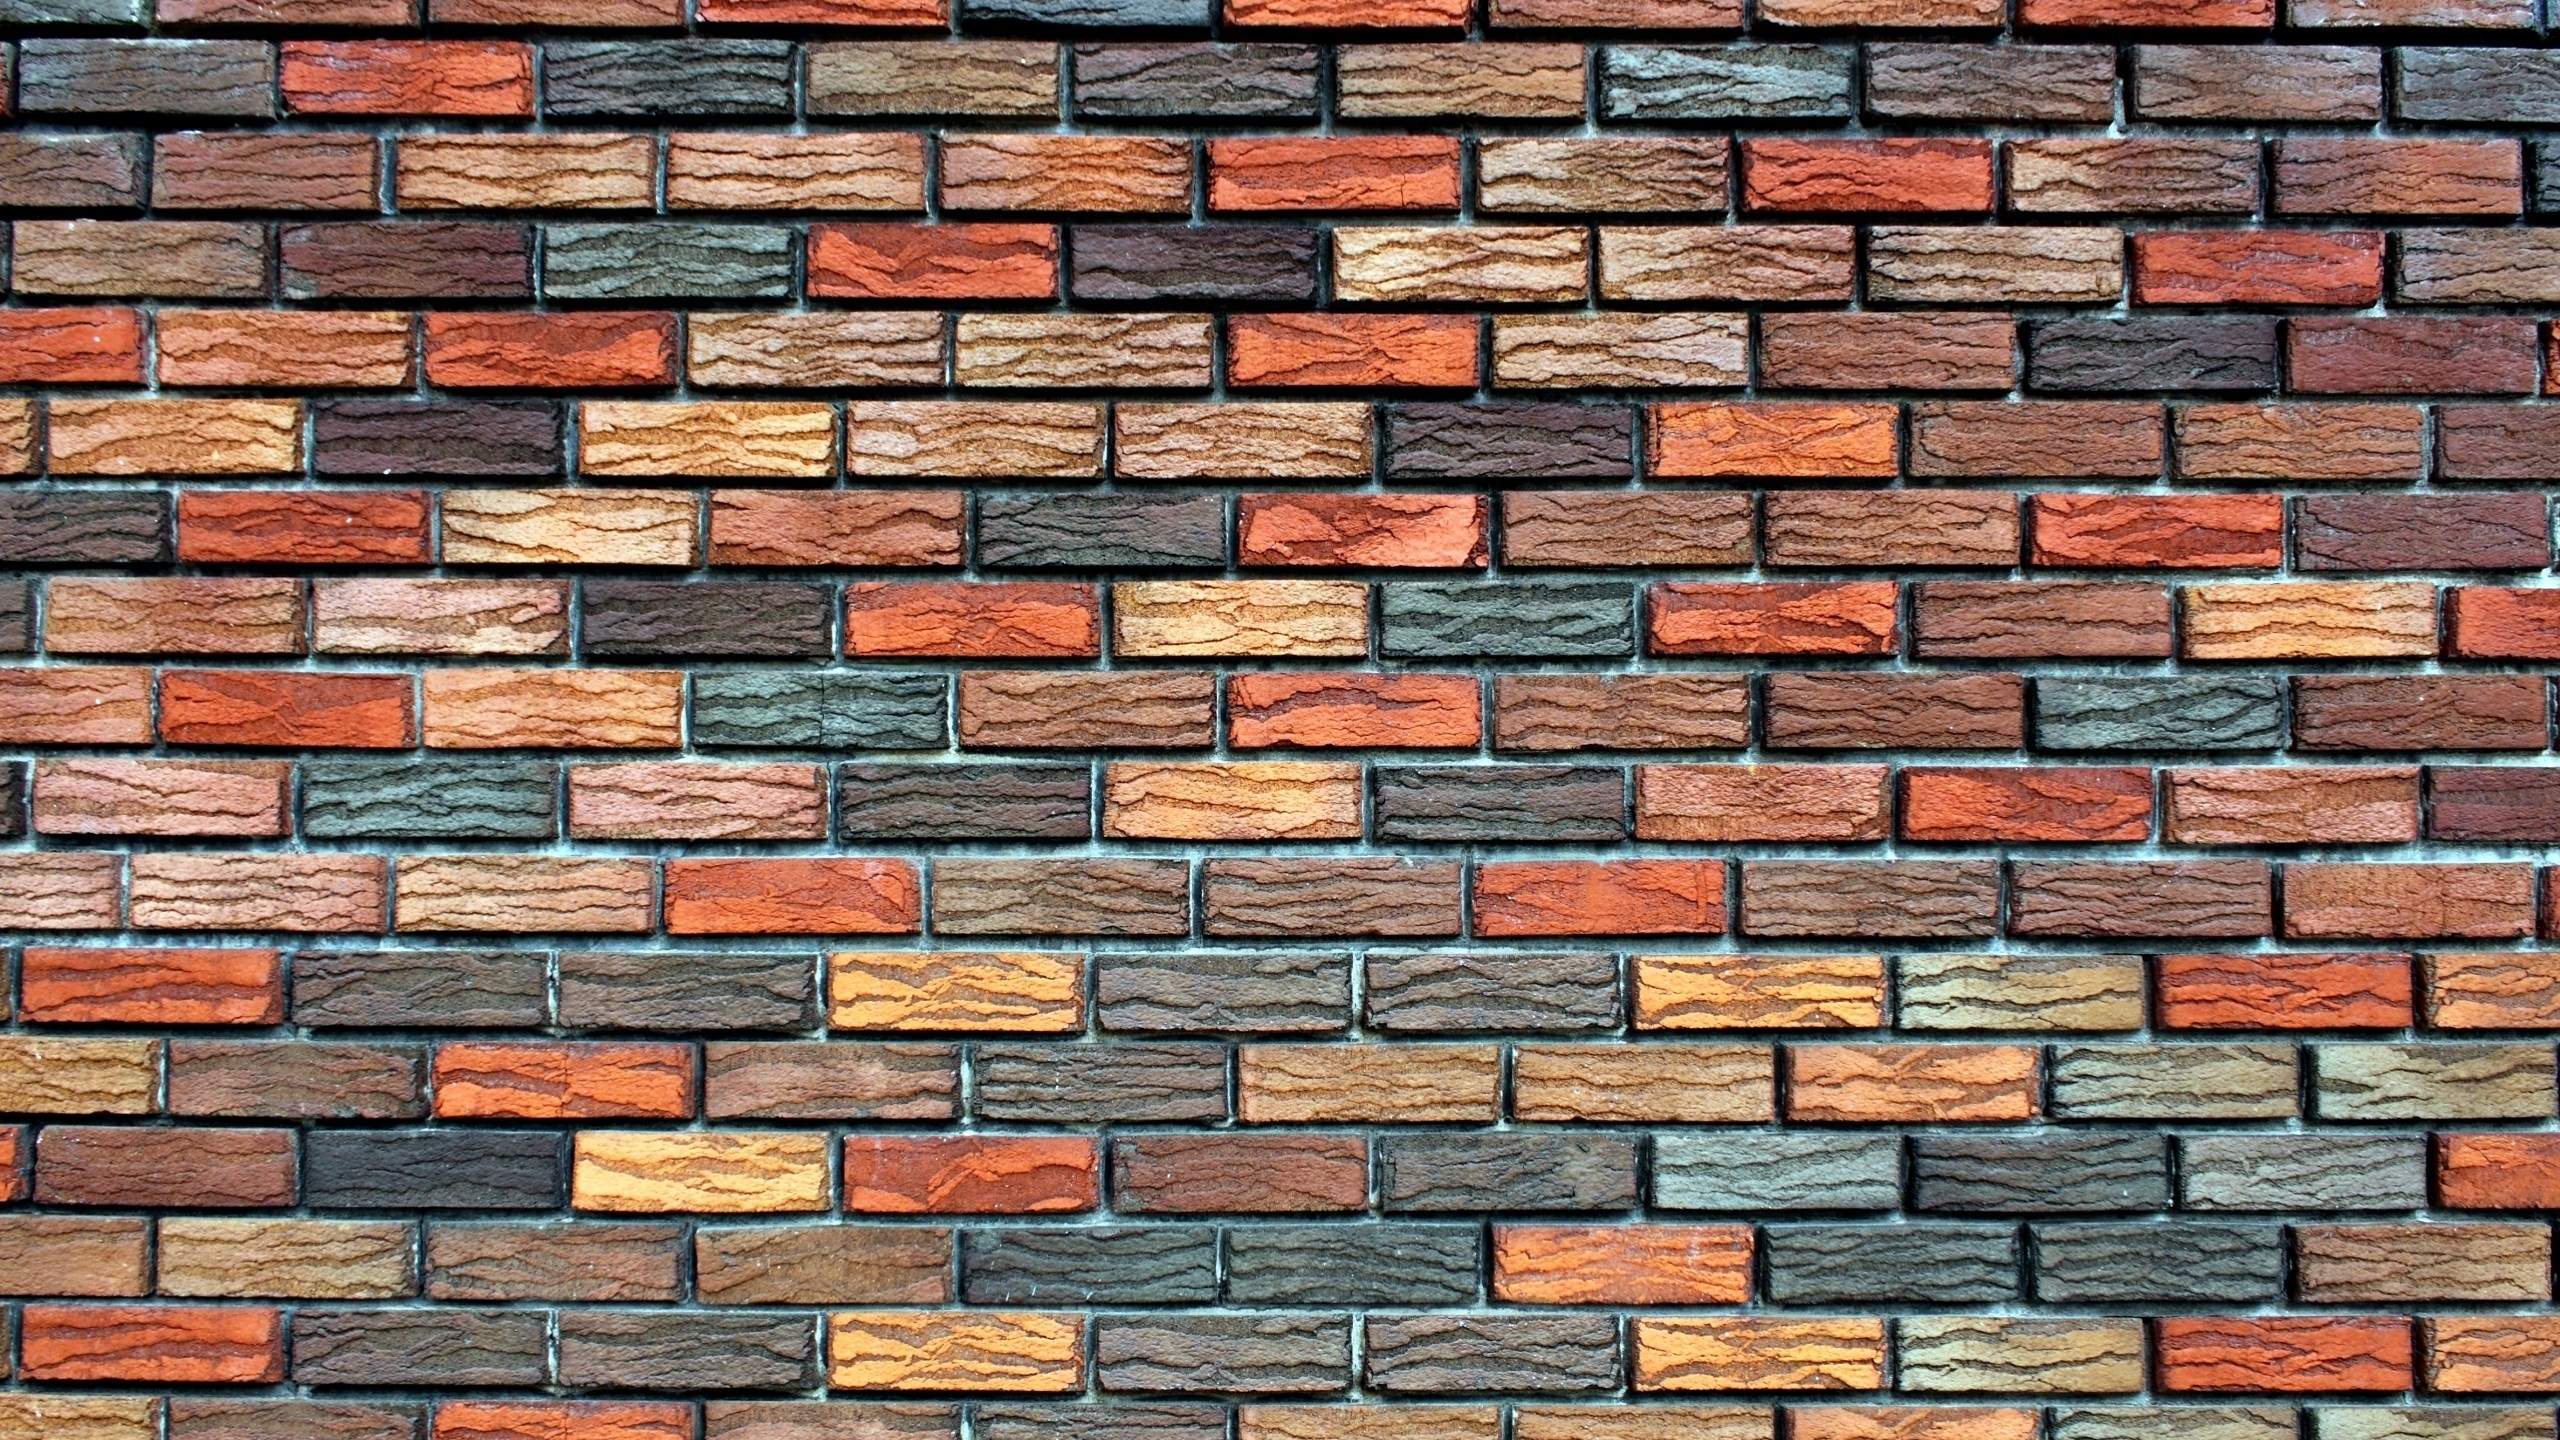 35+ Brick Wall Backgrounds - PSD, Vector EPS, JPG Download ...